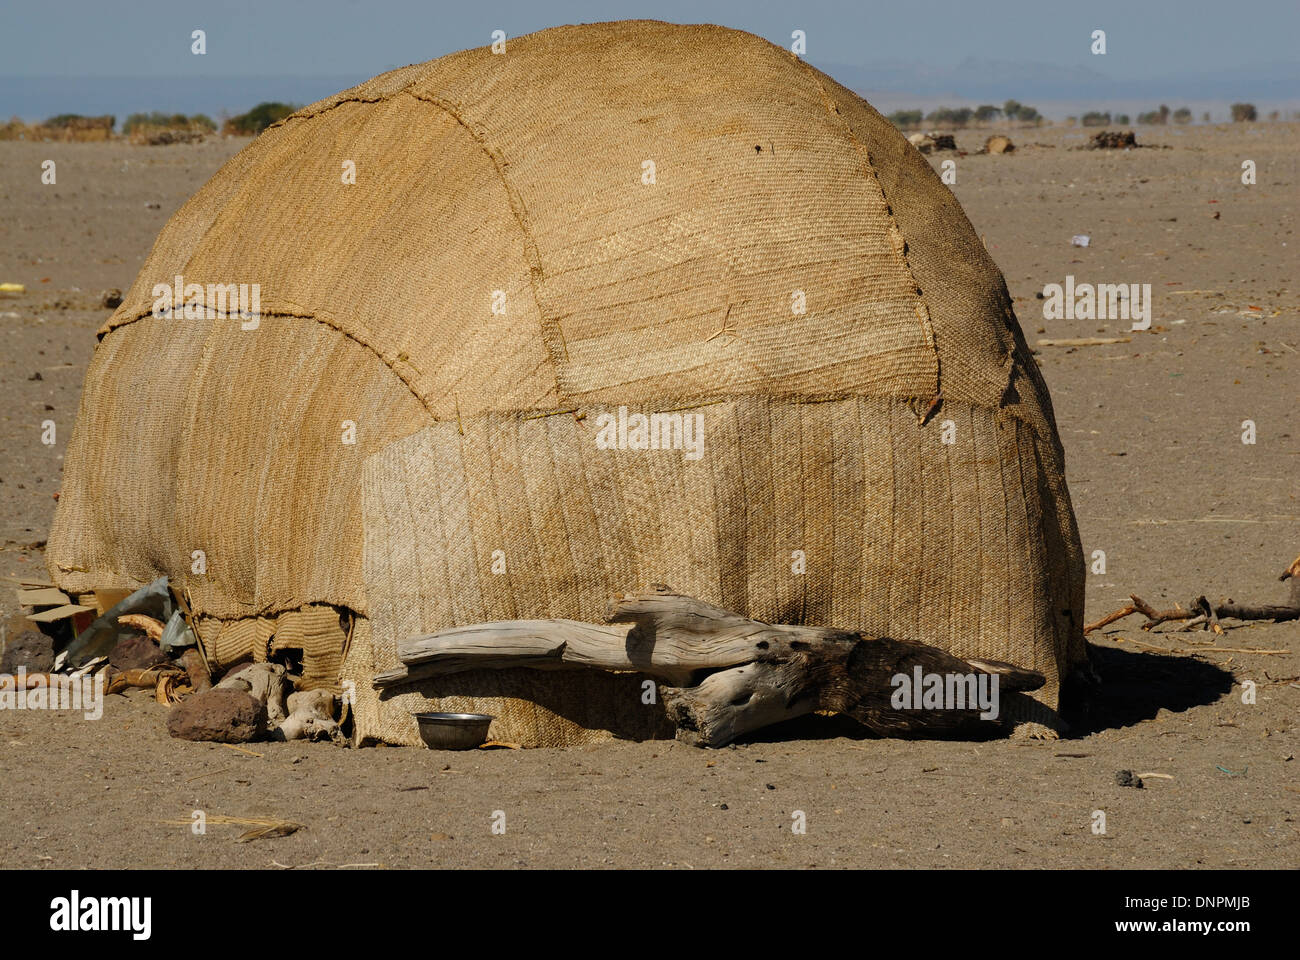 Afar hut in the south desert of Djibouti, Horn of Africa Stock Photo